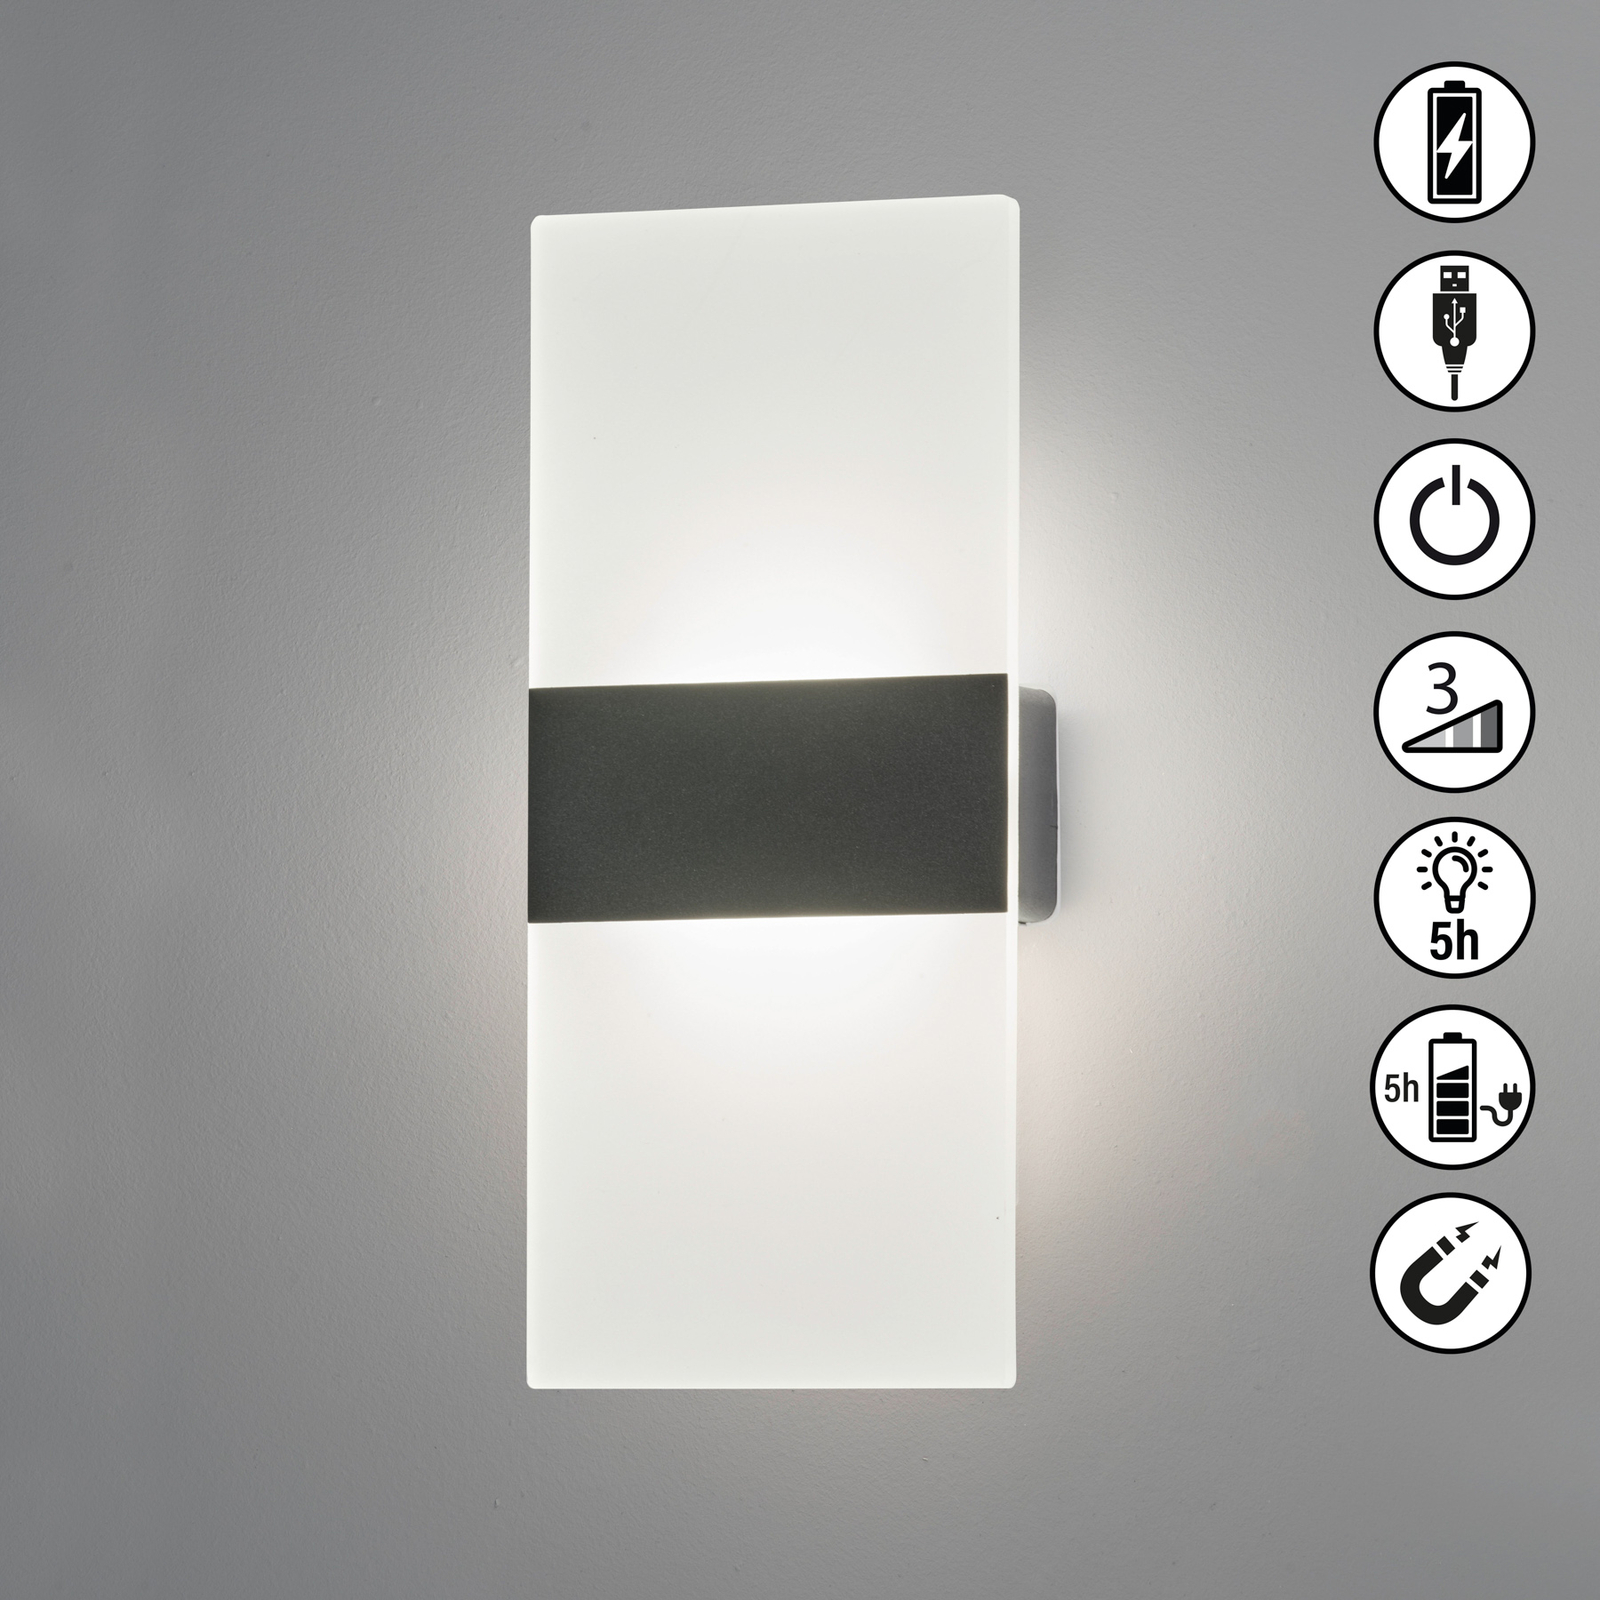 Magnetics rechargeable LED wall light, 22.5 cm high